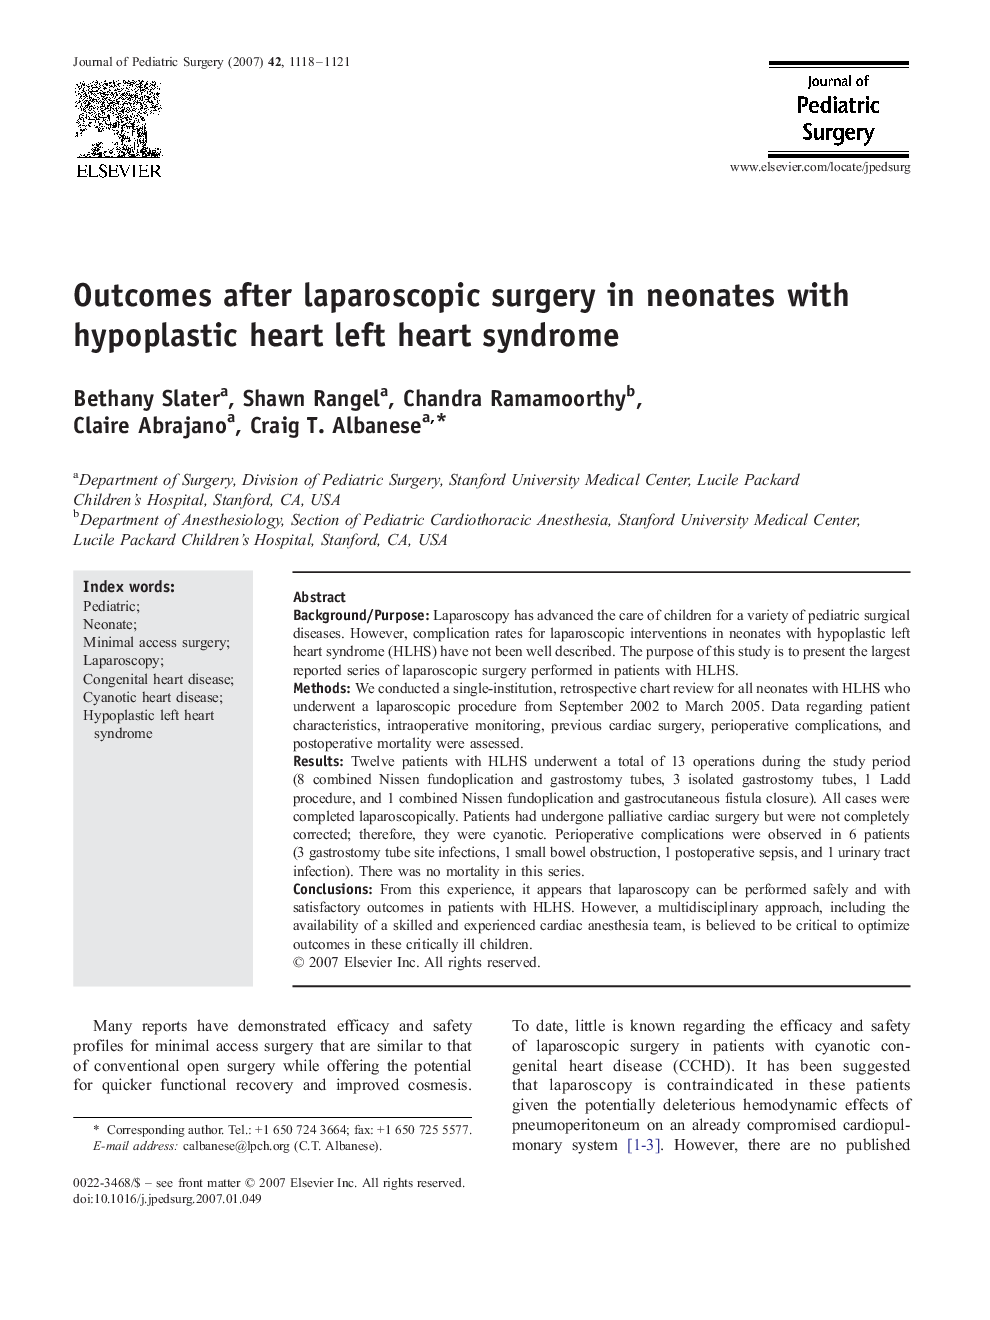 Outcomes after laparoscopic surgery in neonates with hypoplastic heart left heart syndrome